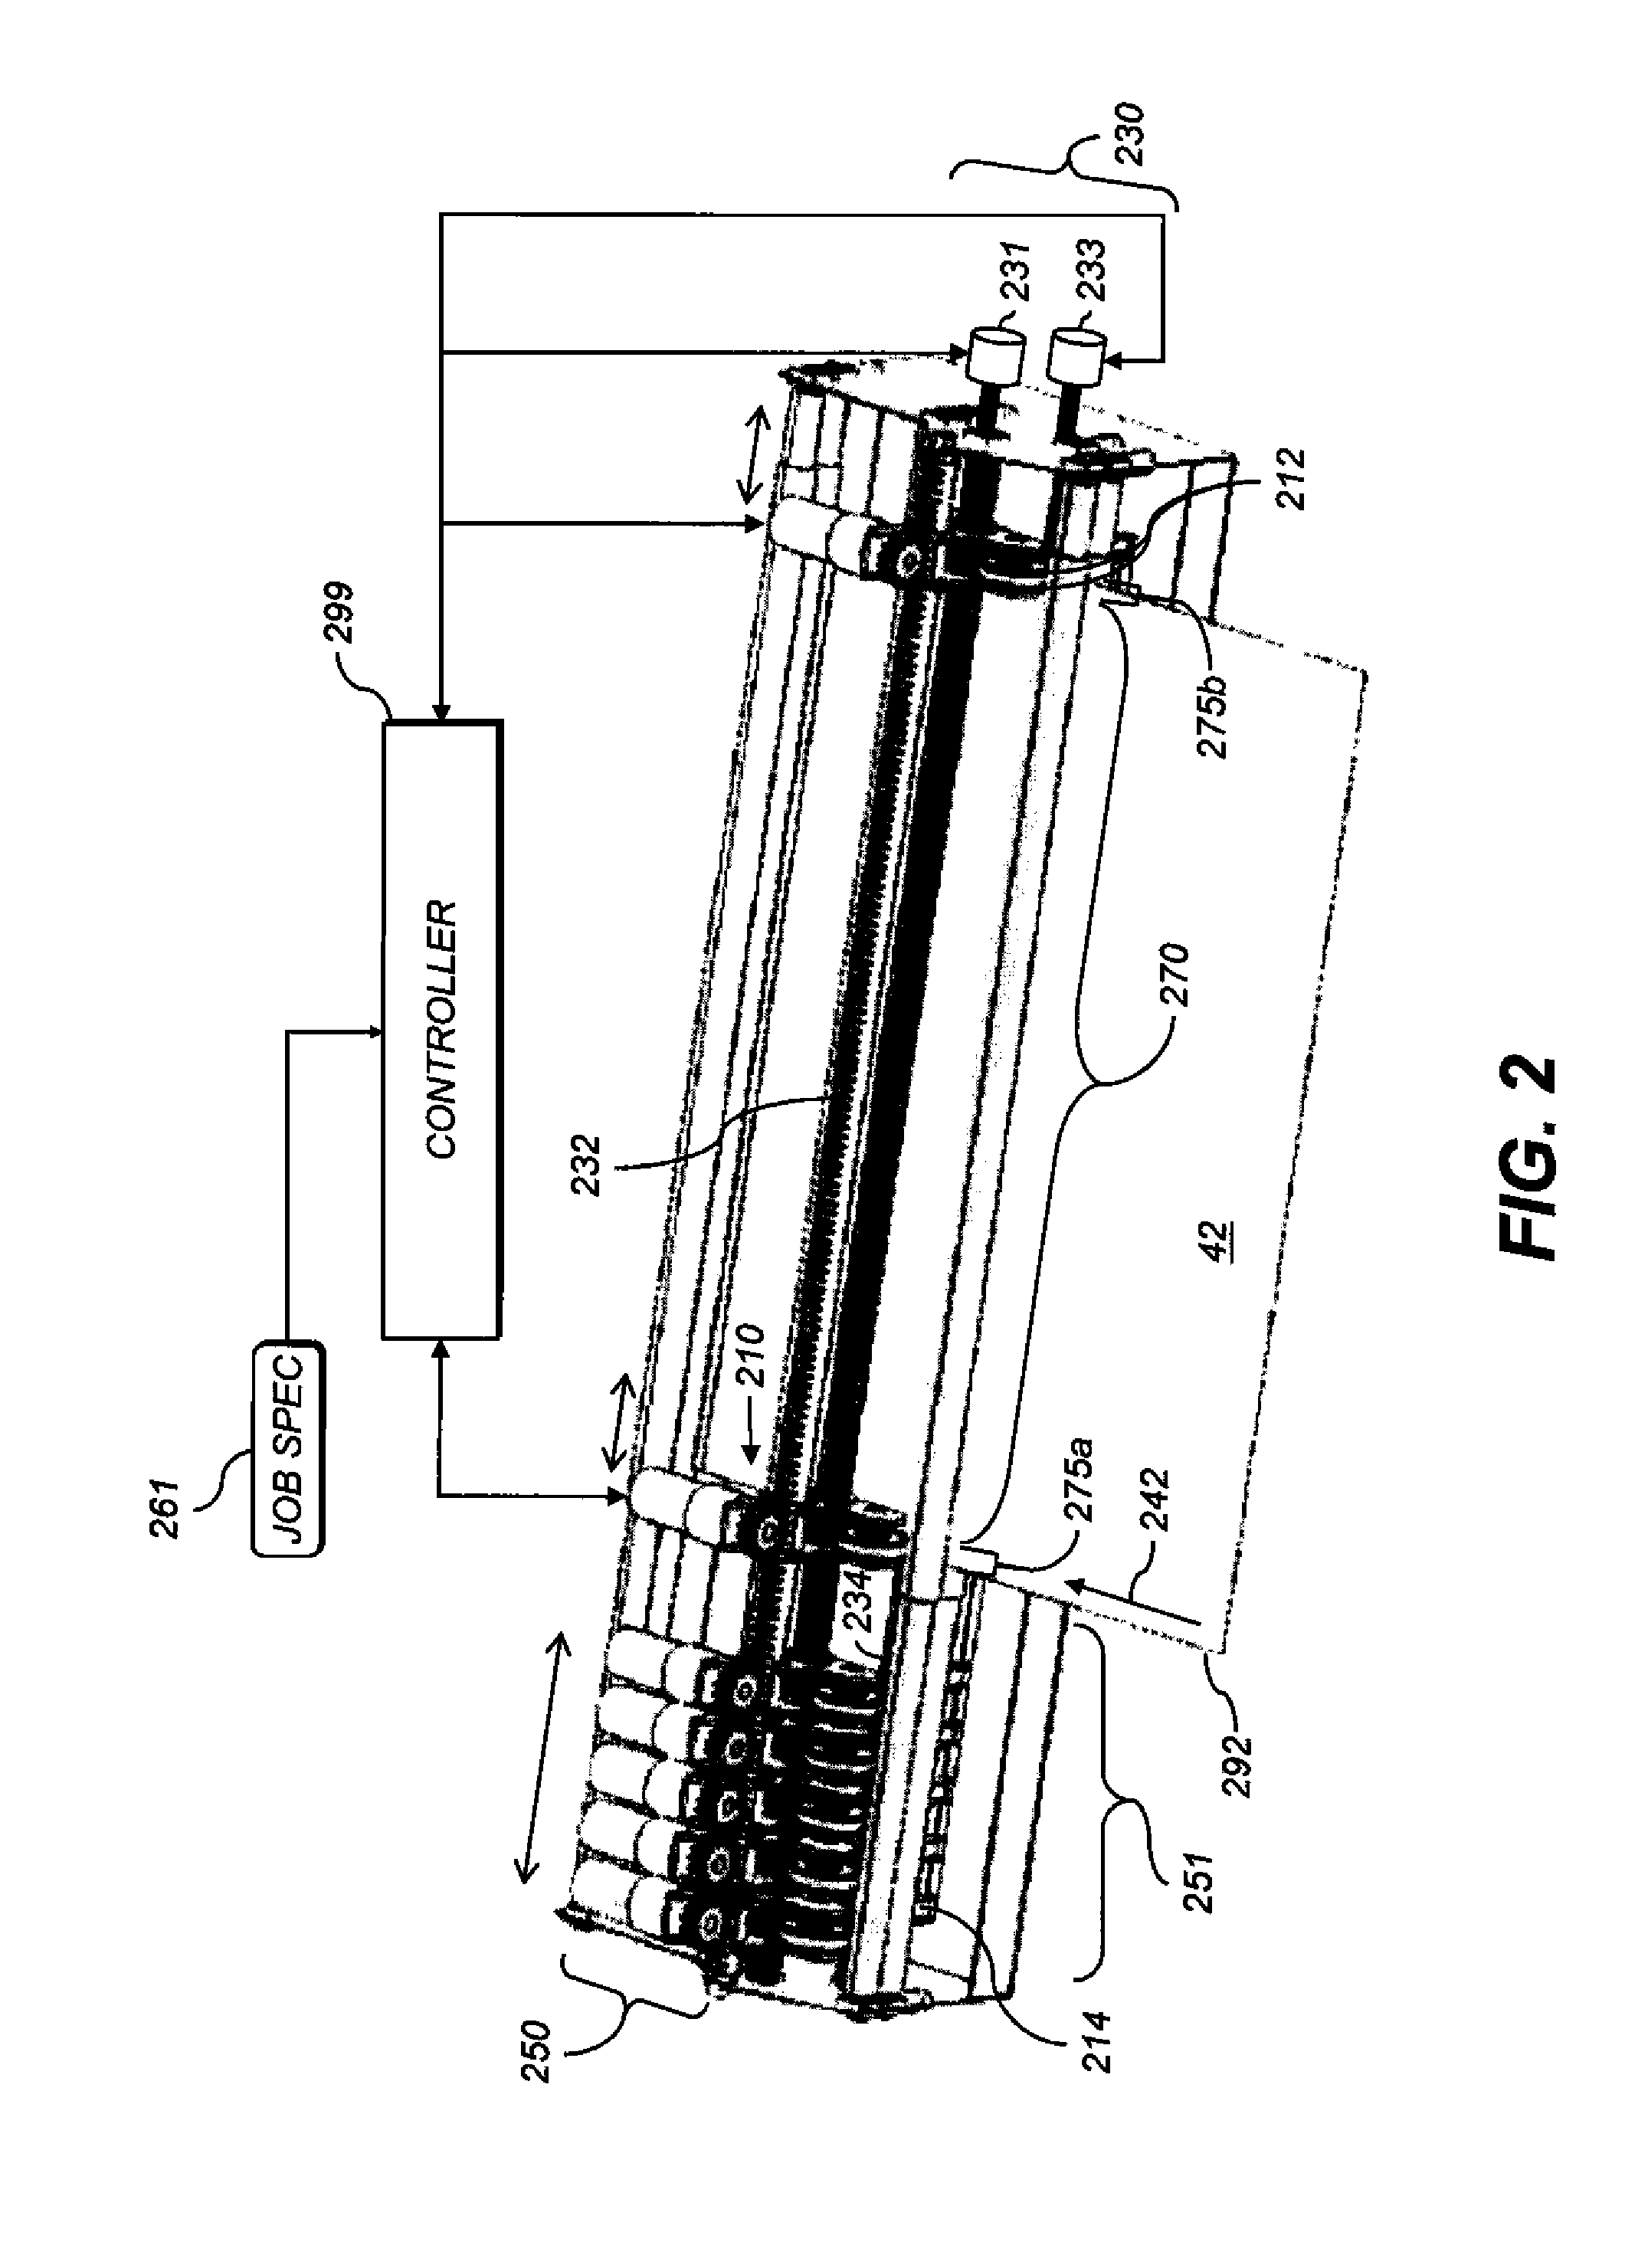 Perforator with translating perforating devices